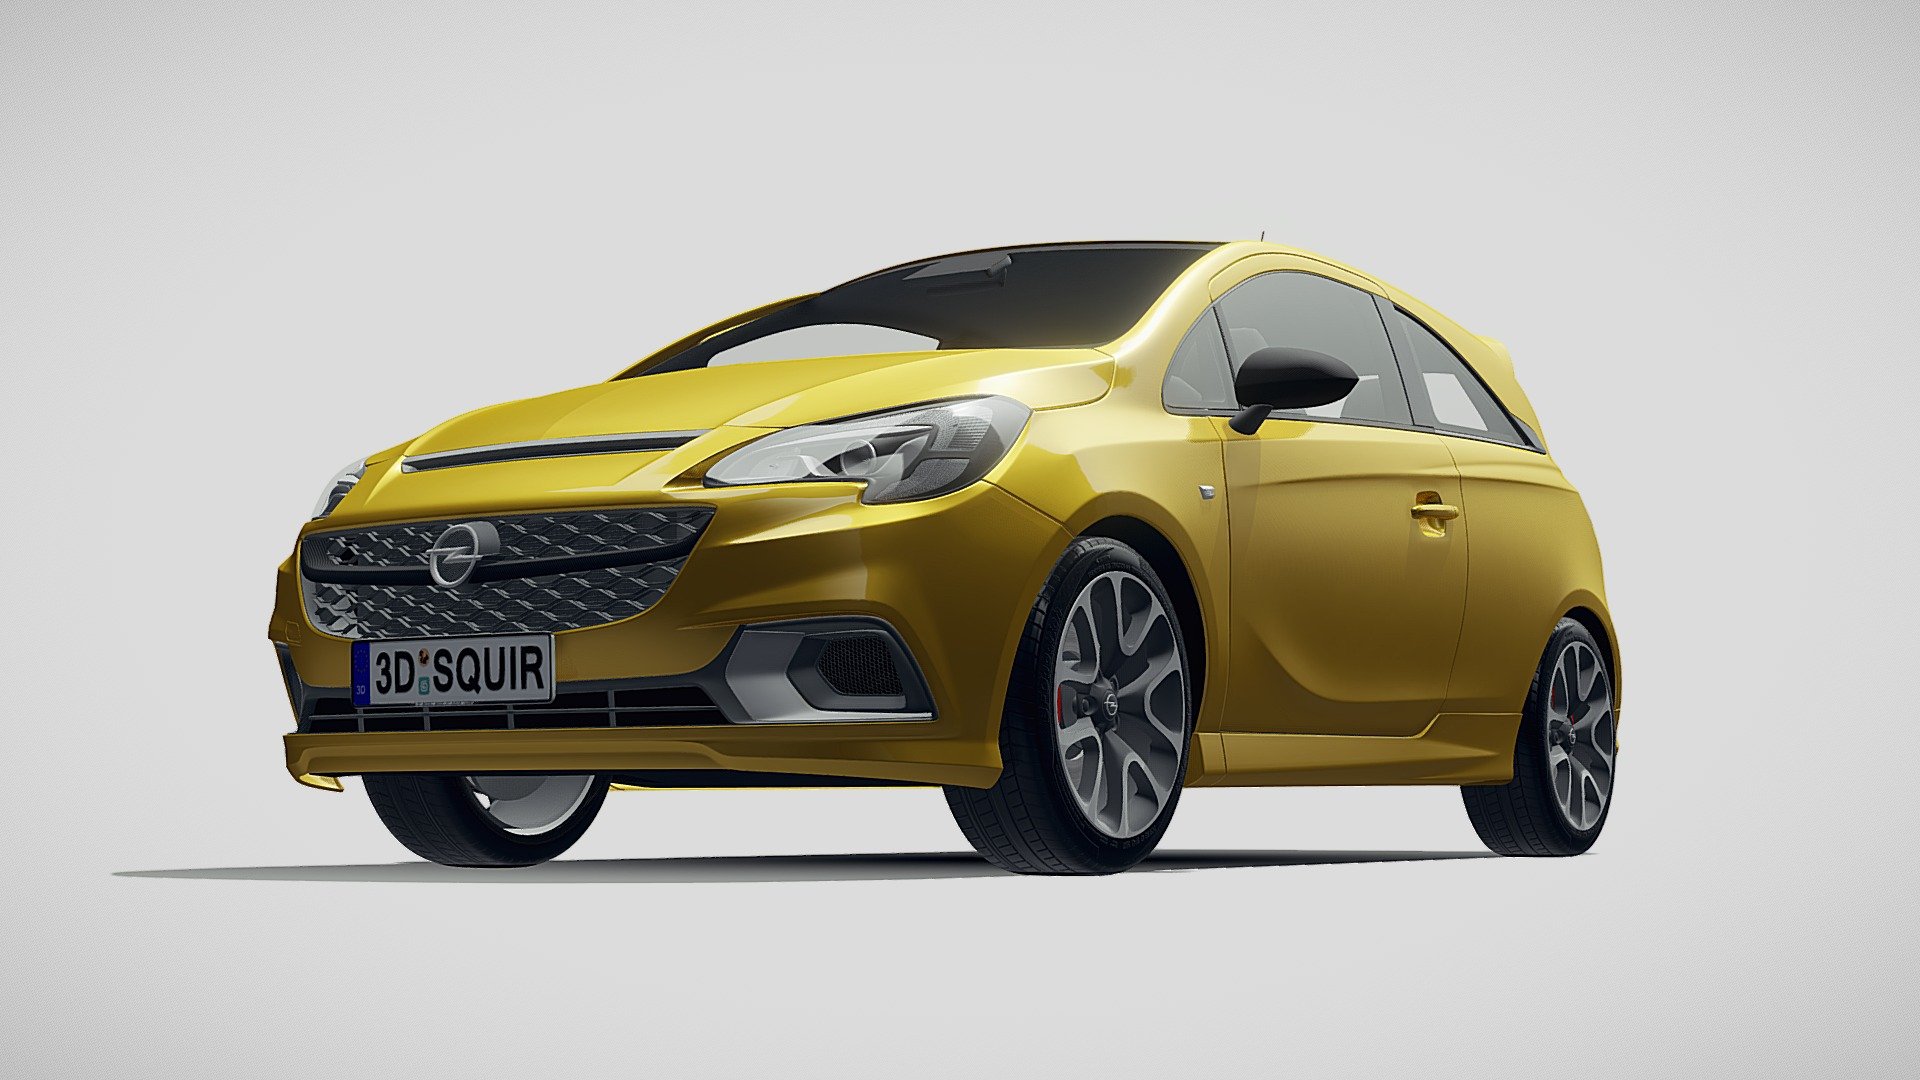 Opel Corsa GSI 2019 - Buy Royalty Free 3D model by SQUIR3D (@SQUIR3D)  [fdadf75]